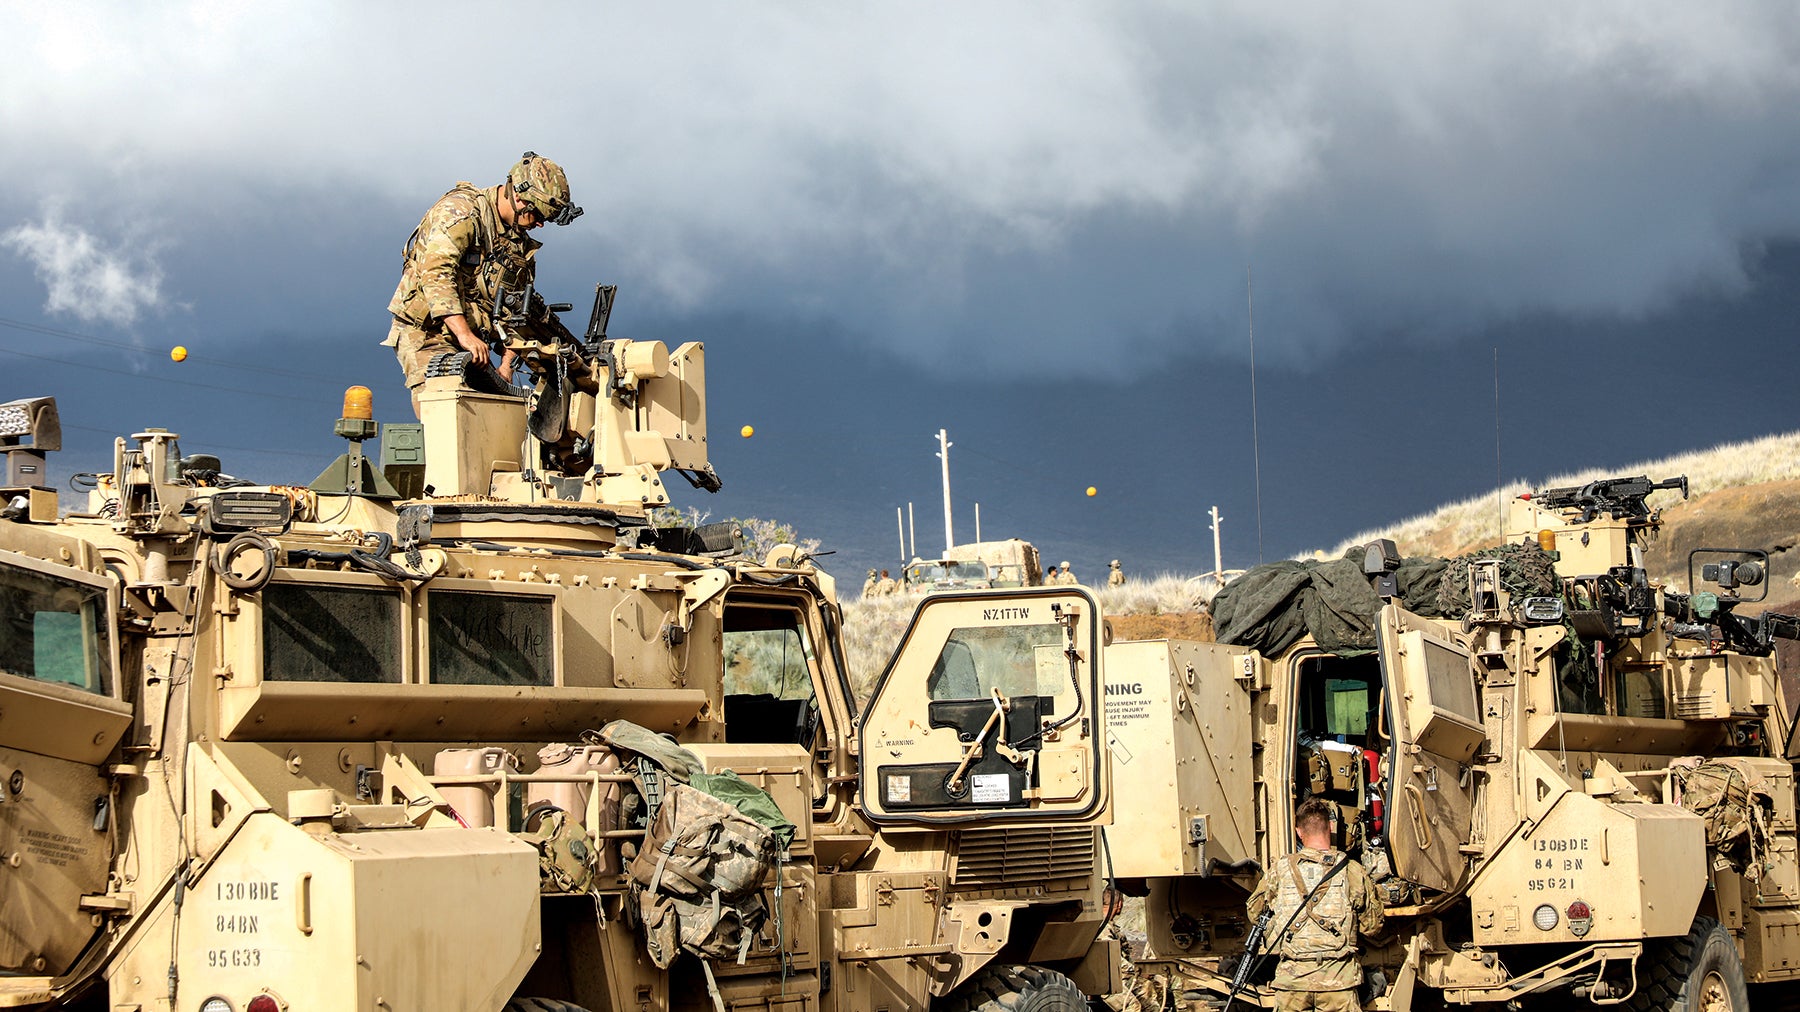 Soldiers with the 130th Engineer Brigade, 8th Theater Sustainment Command, conduct maintenance on vehicles and weapon systems at Pohakuloa Training Area, Hawaii. (Credit: U.S. Army/Sgt. 1st Class Joshua Brandenburg)